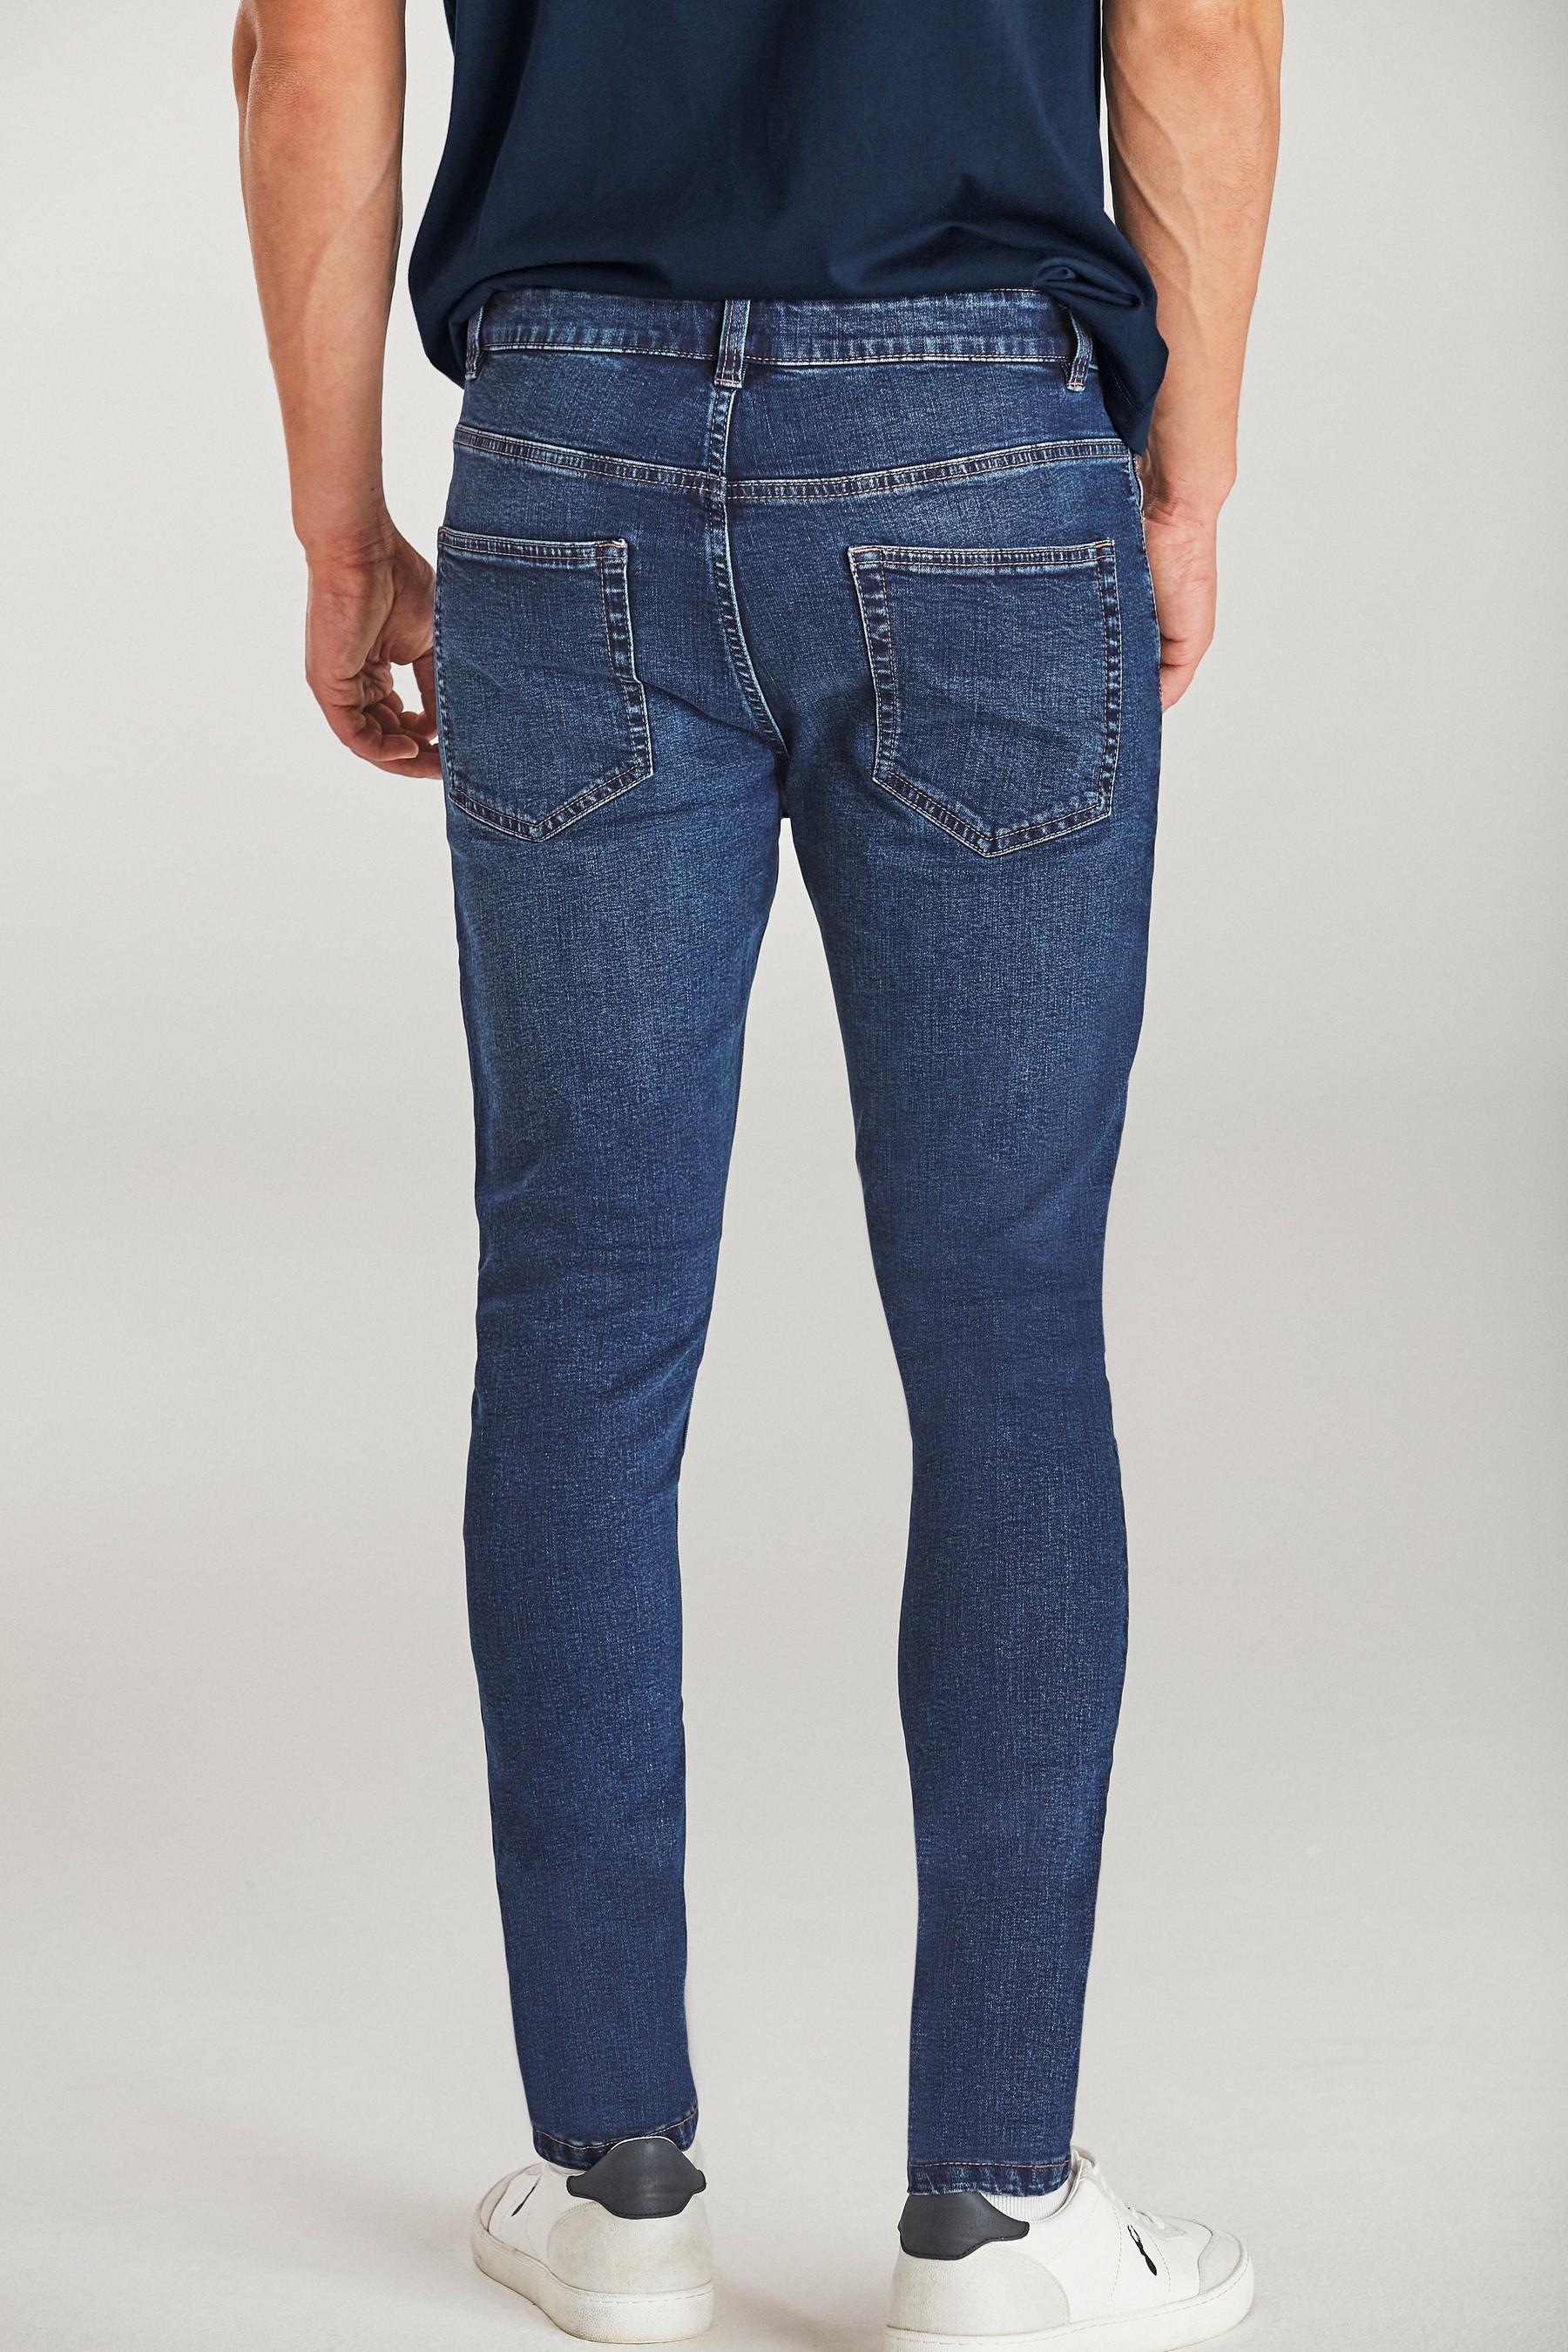 Buy Mid Blue Super Skinny Classic Stretch Jeans from the Next UK online ...